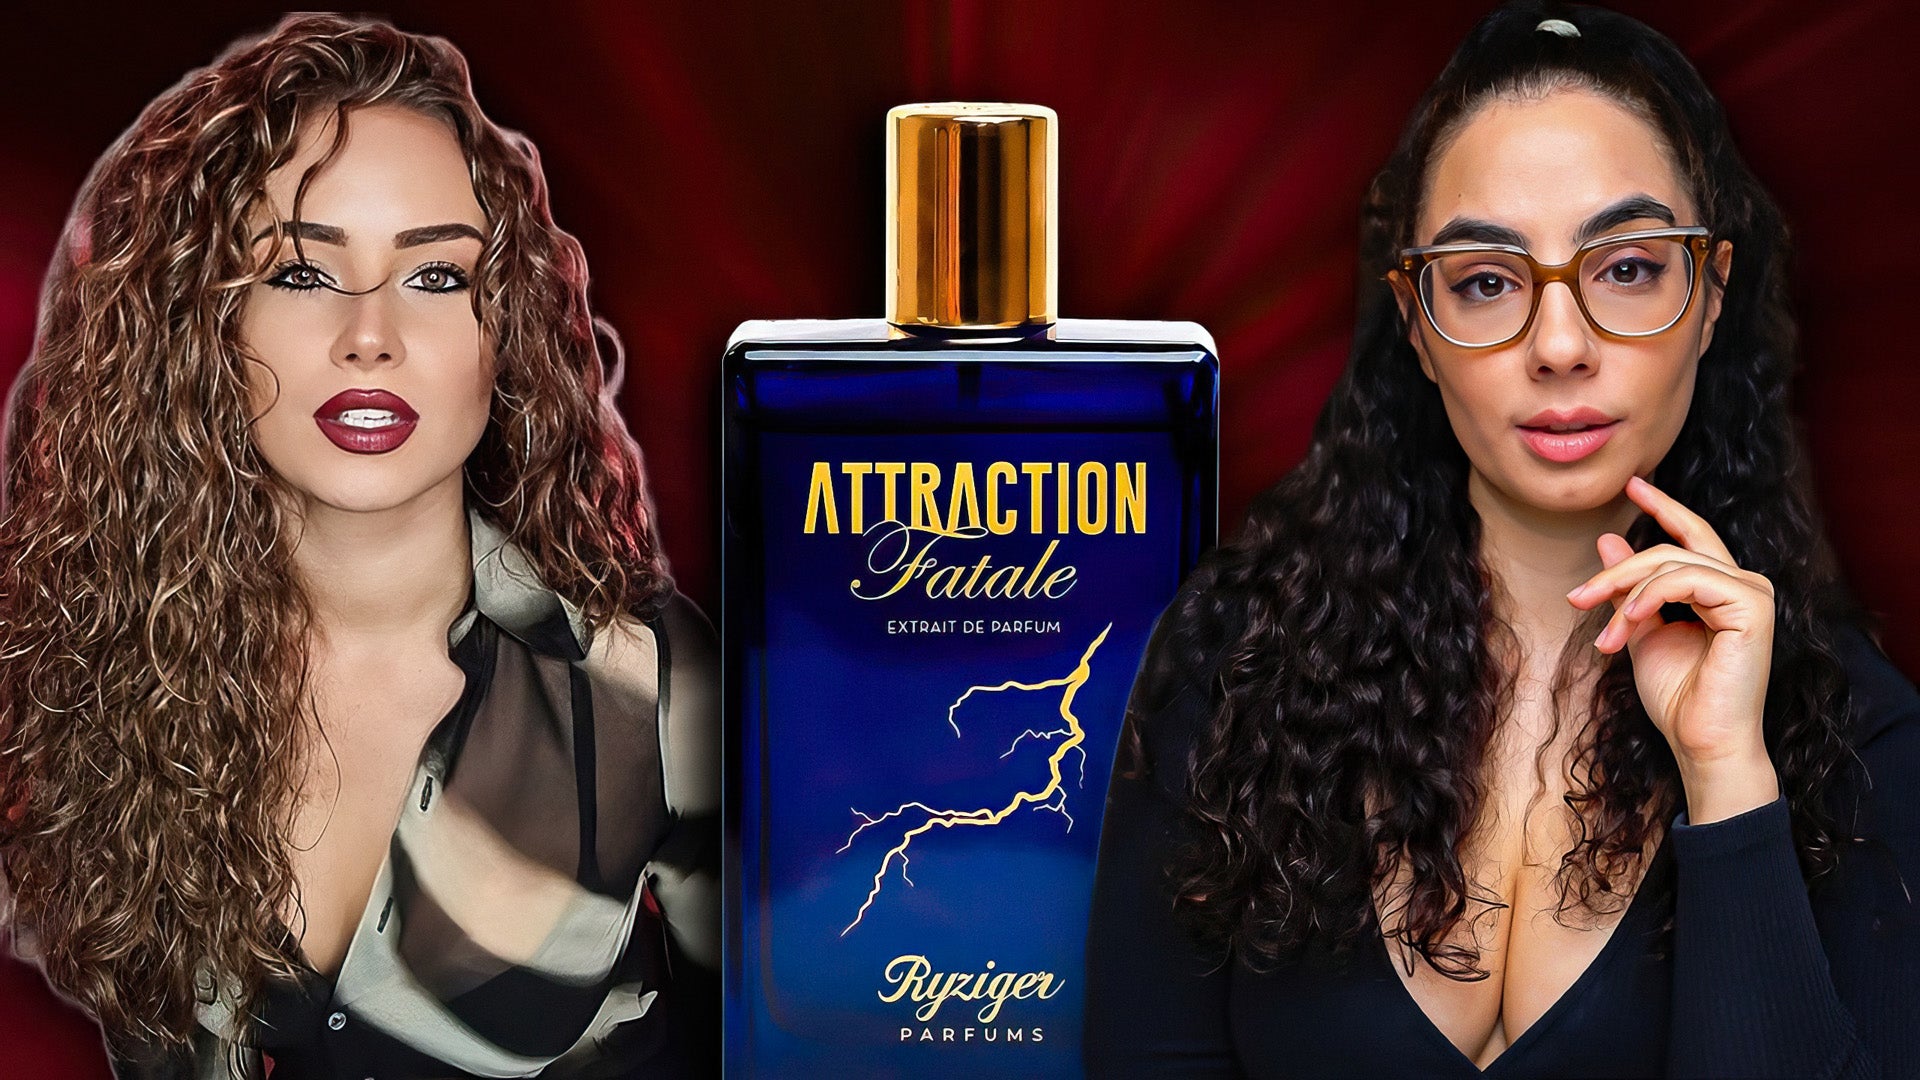 Curly Scents takes a deep look at CurlyFragrance Attraction Fatale